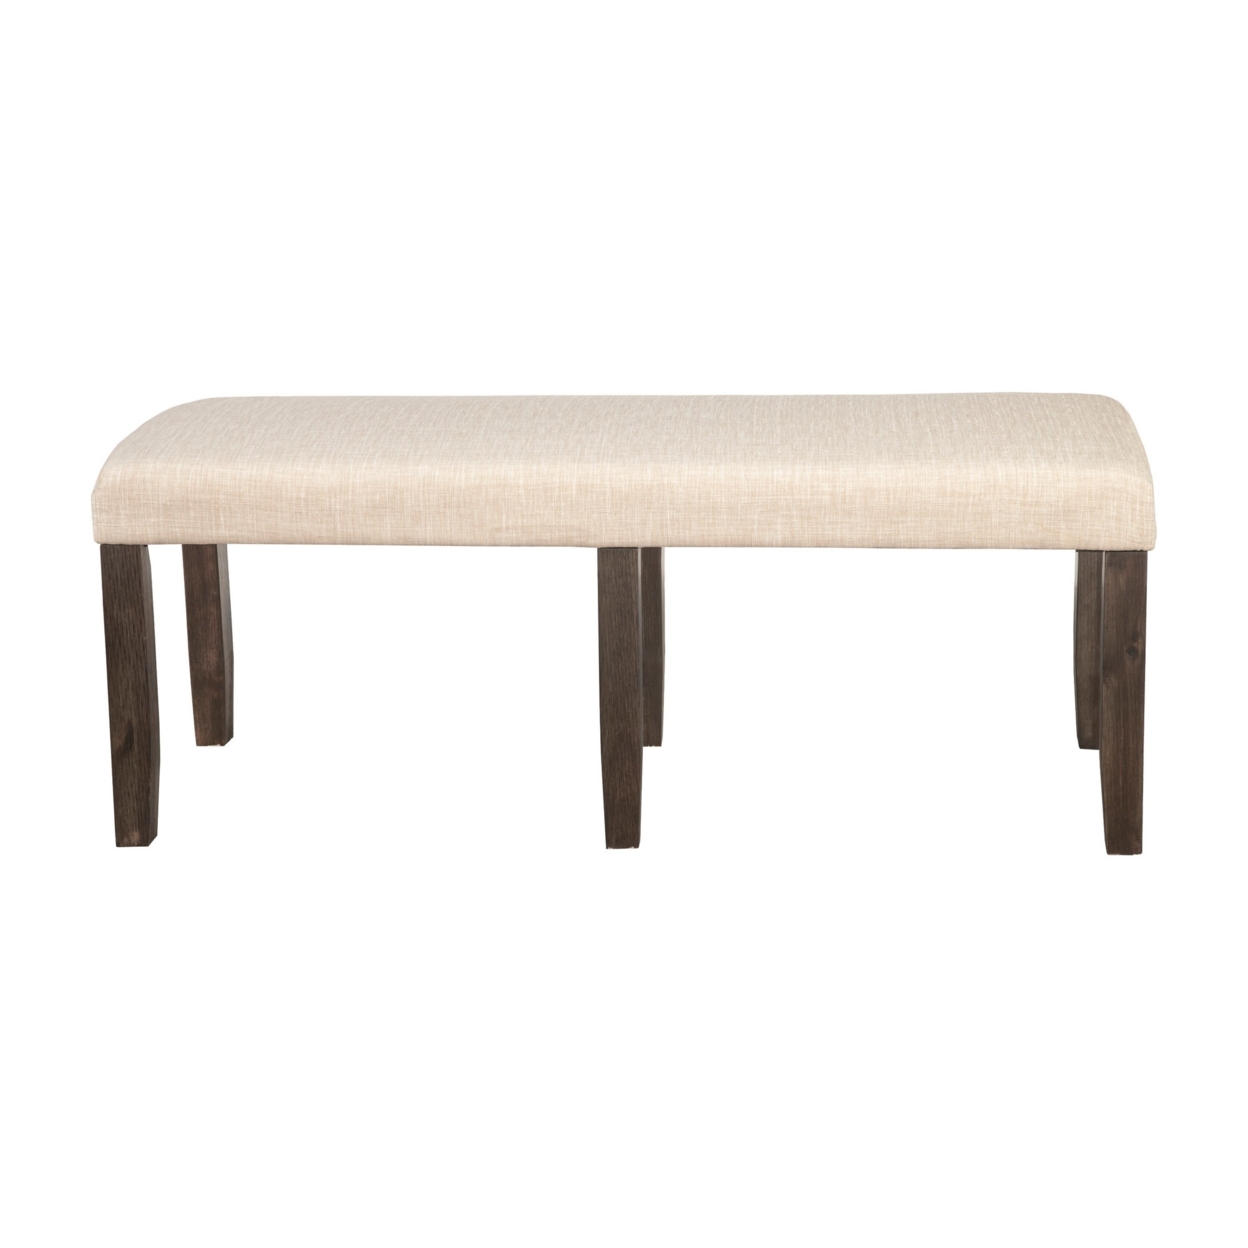 Brian 51 Inch Acacia Wood Dining Bench, Polyester Upholstery, Brown, Beige- Saltoro Sherpi